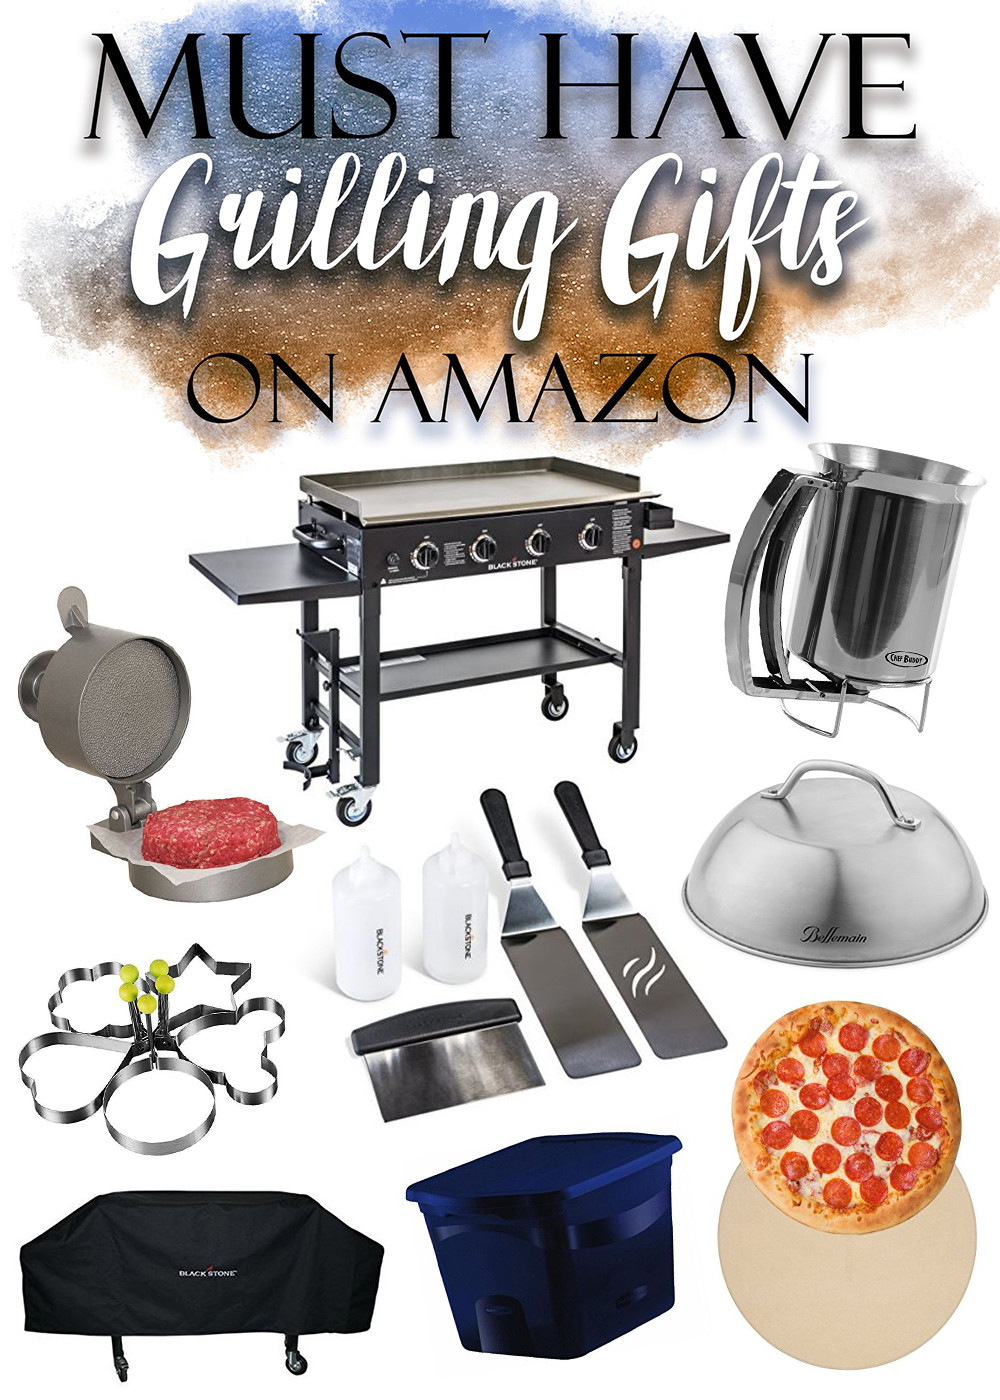 Amazon Fathers Day Gift Ideas
 Top Grilling Gifts for Dad on Amazon Father s Day ideas